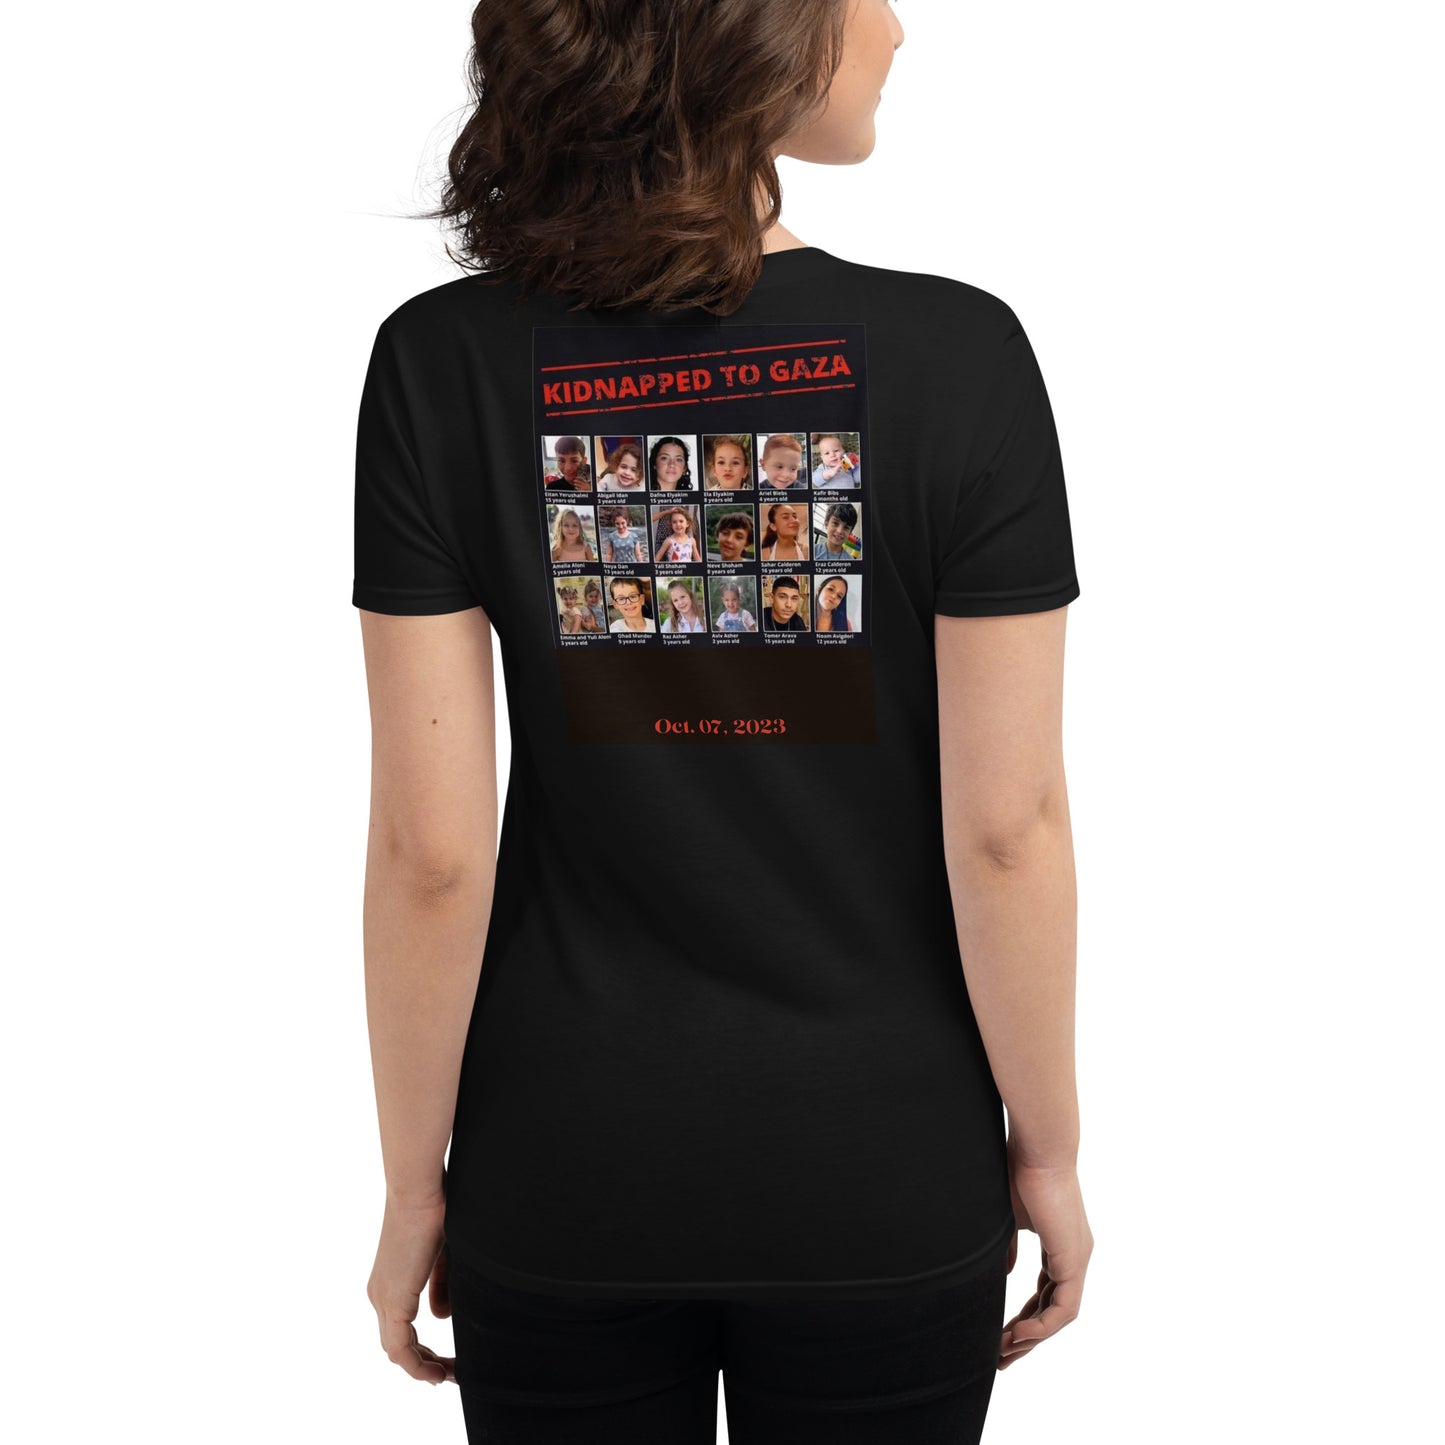 #Bring them home now! #3 - Women's short sleeve t-shirt (5 colors)